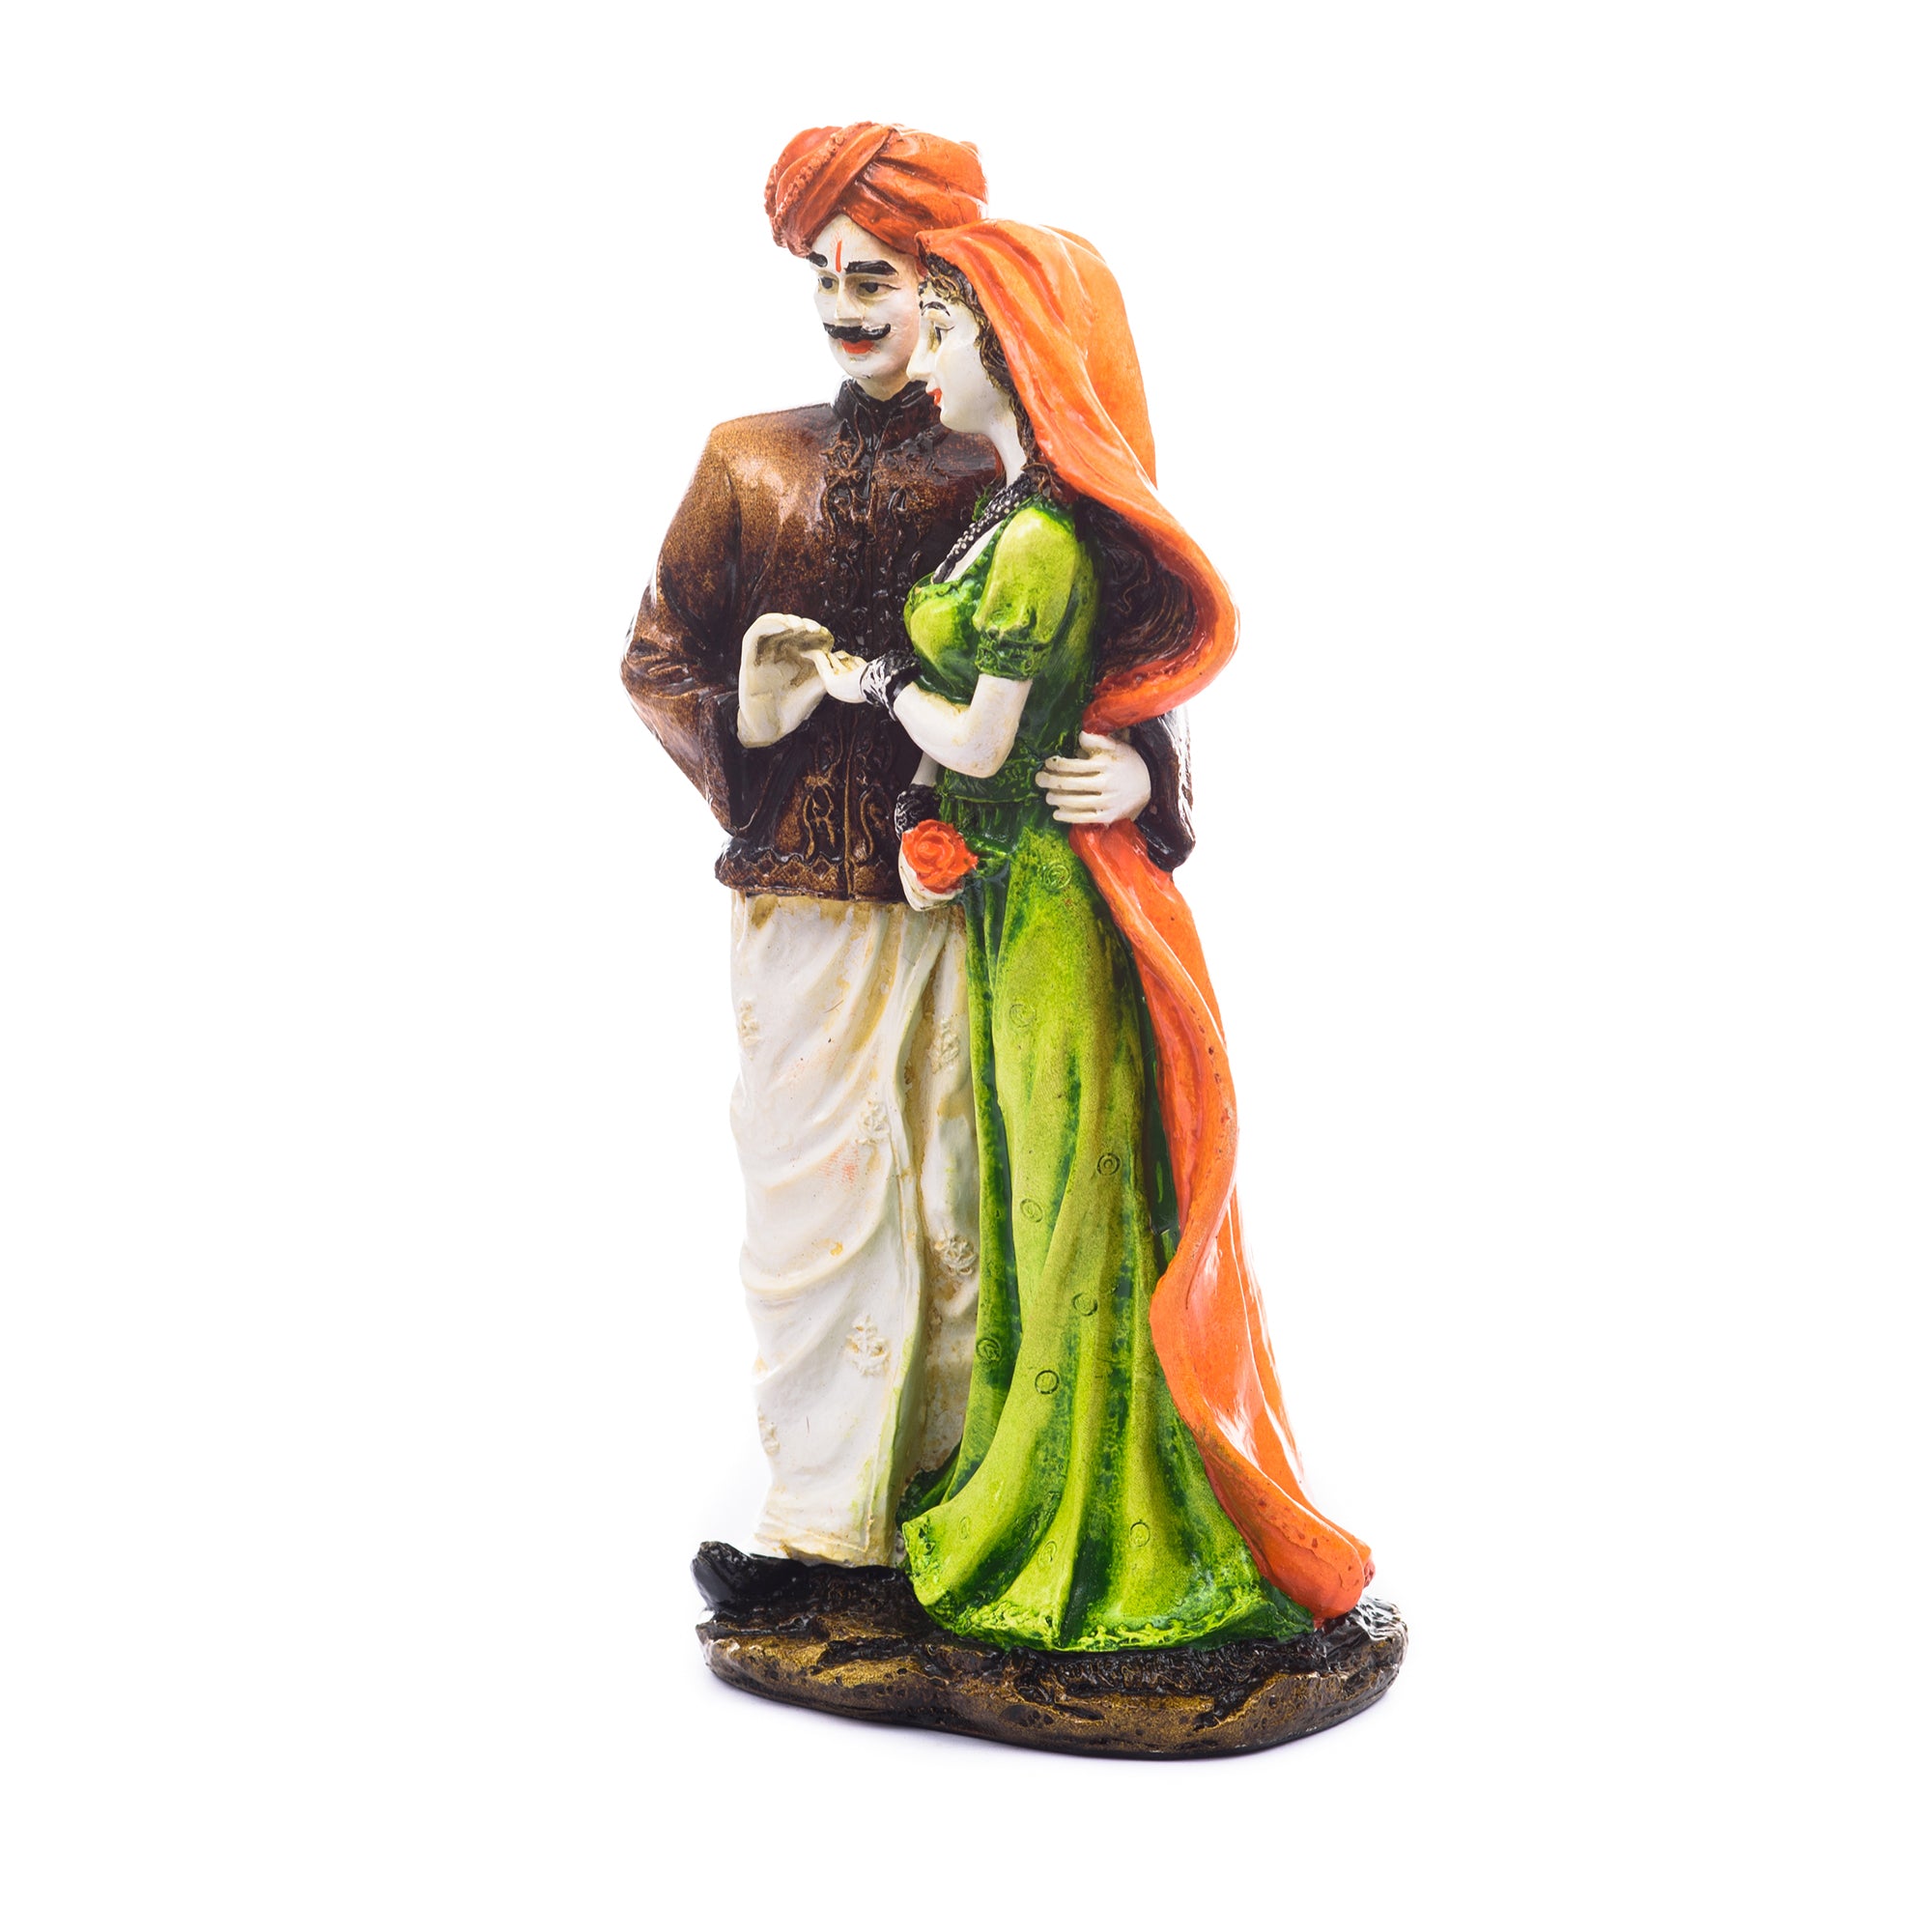 Polyresin Rajasthani Man And Women Statue Handcrafted Human Figurines Decorative Showpiece 2